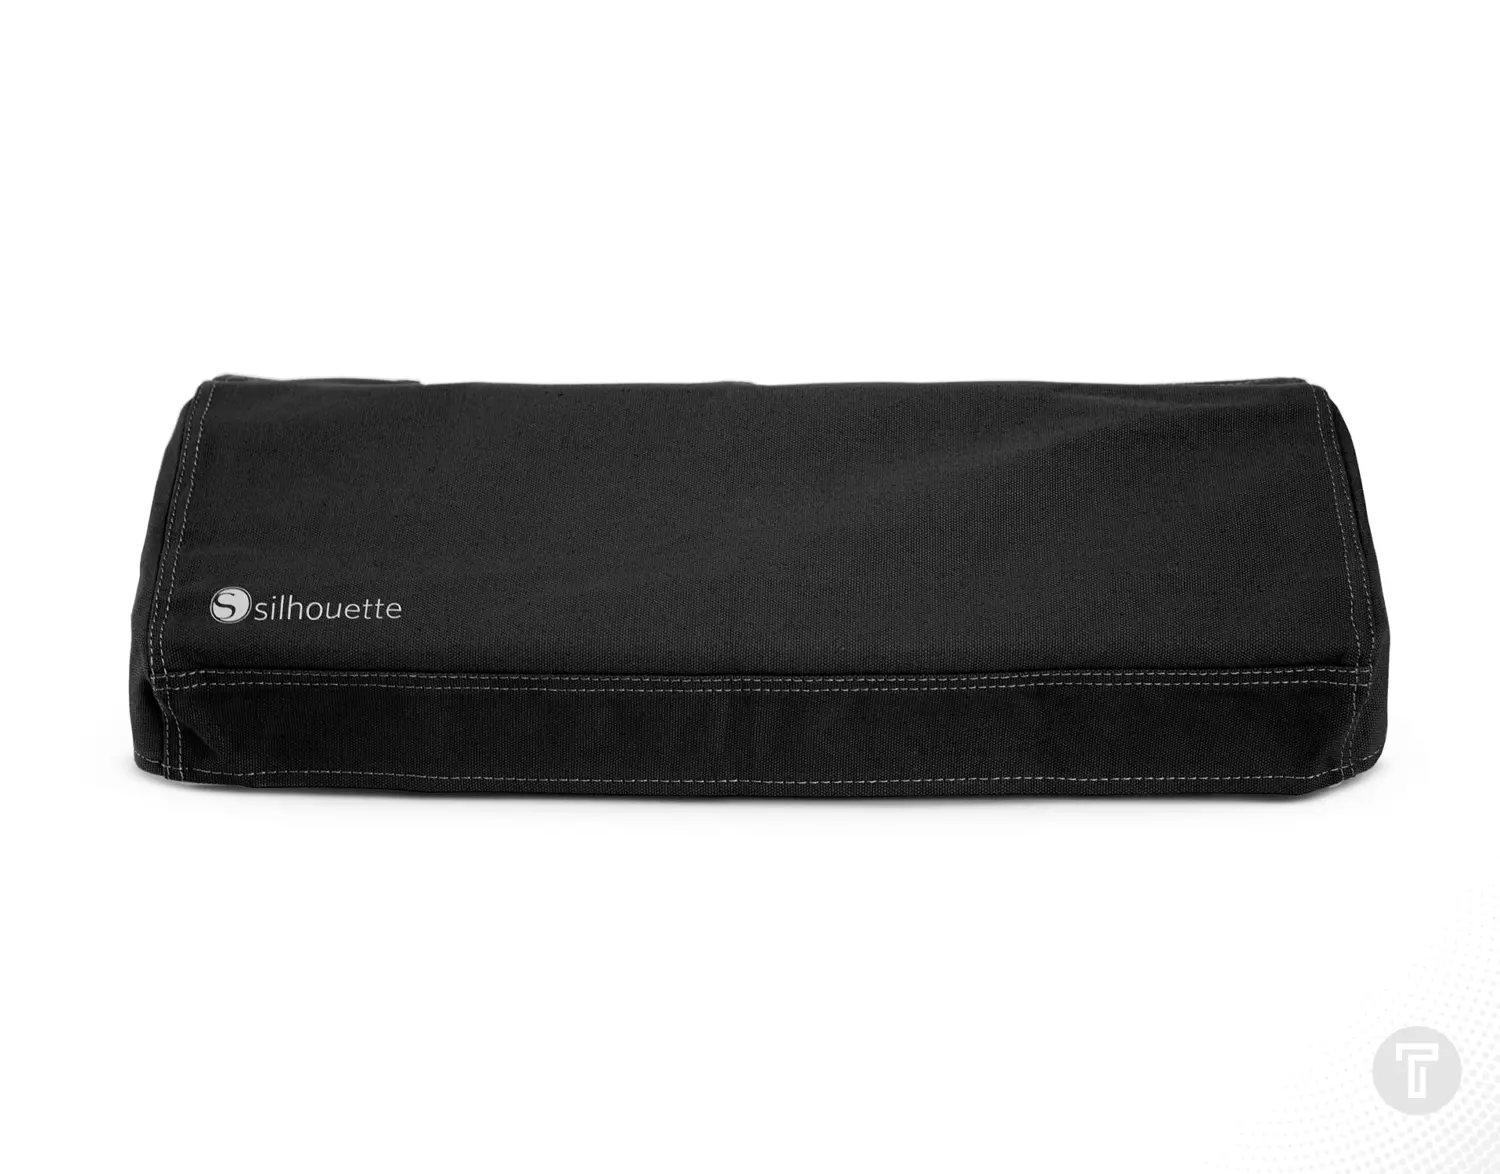 Silhouette cameo 4 dustcover black